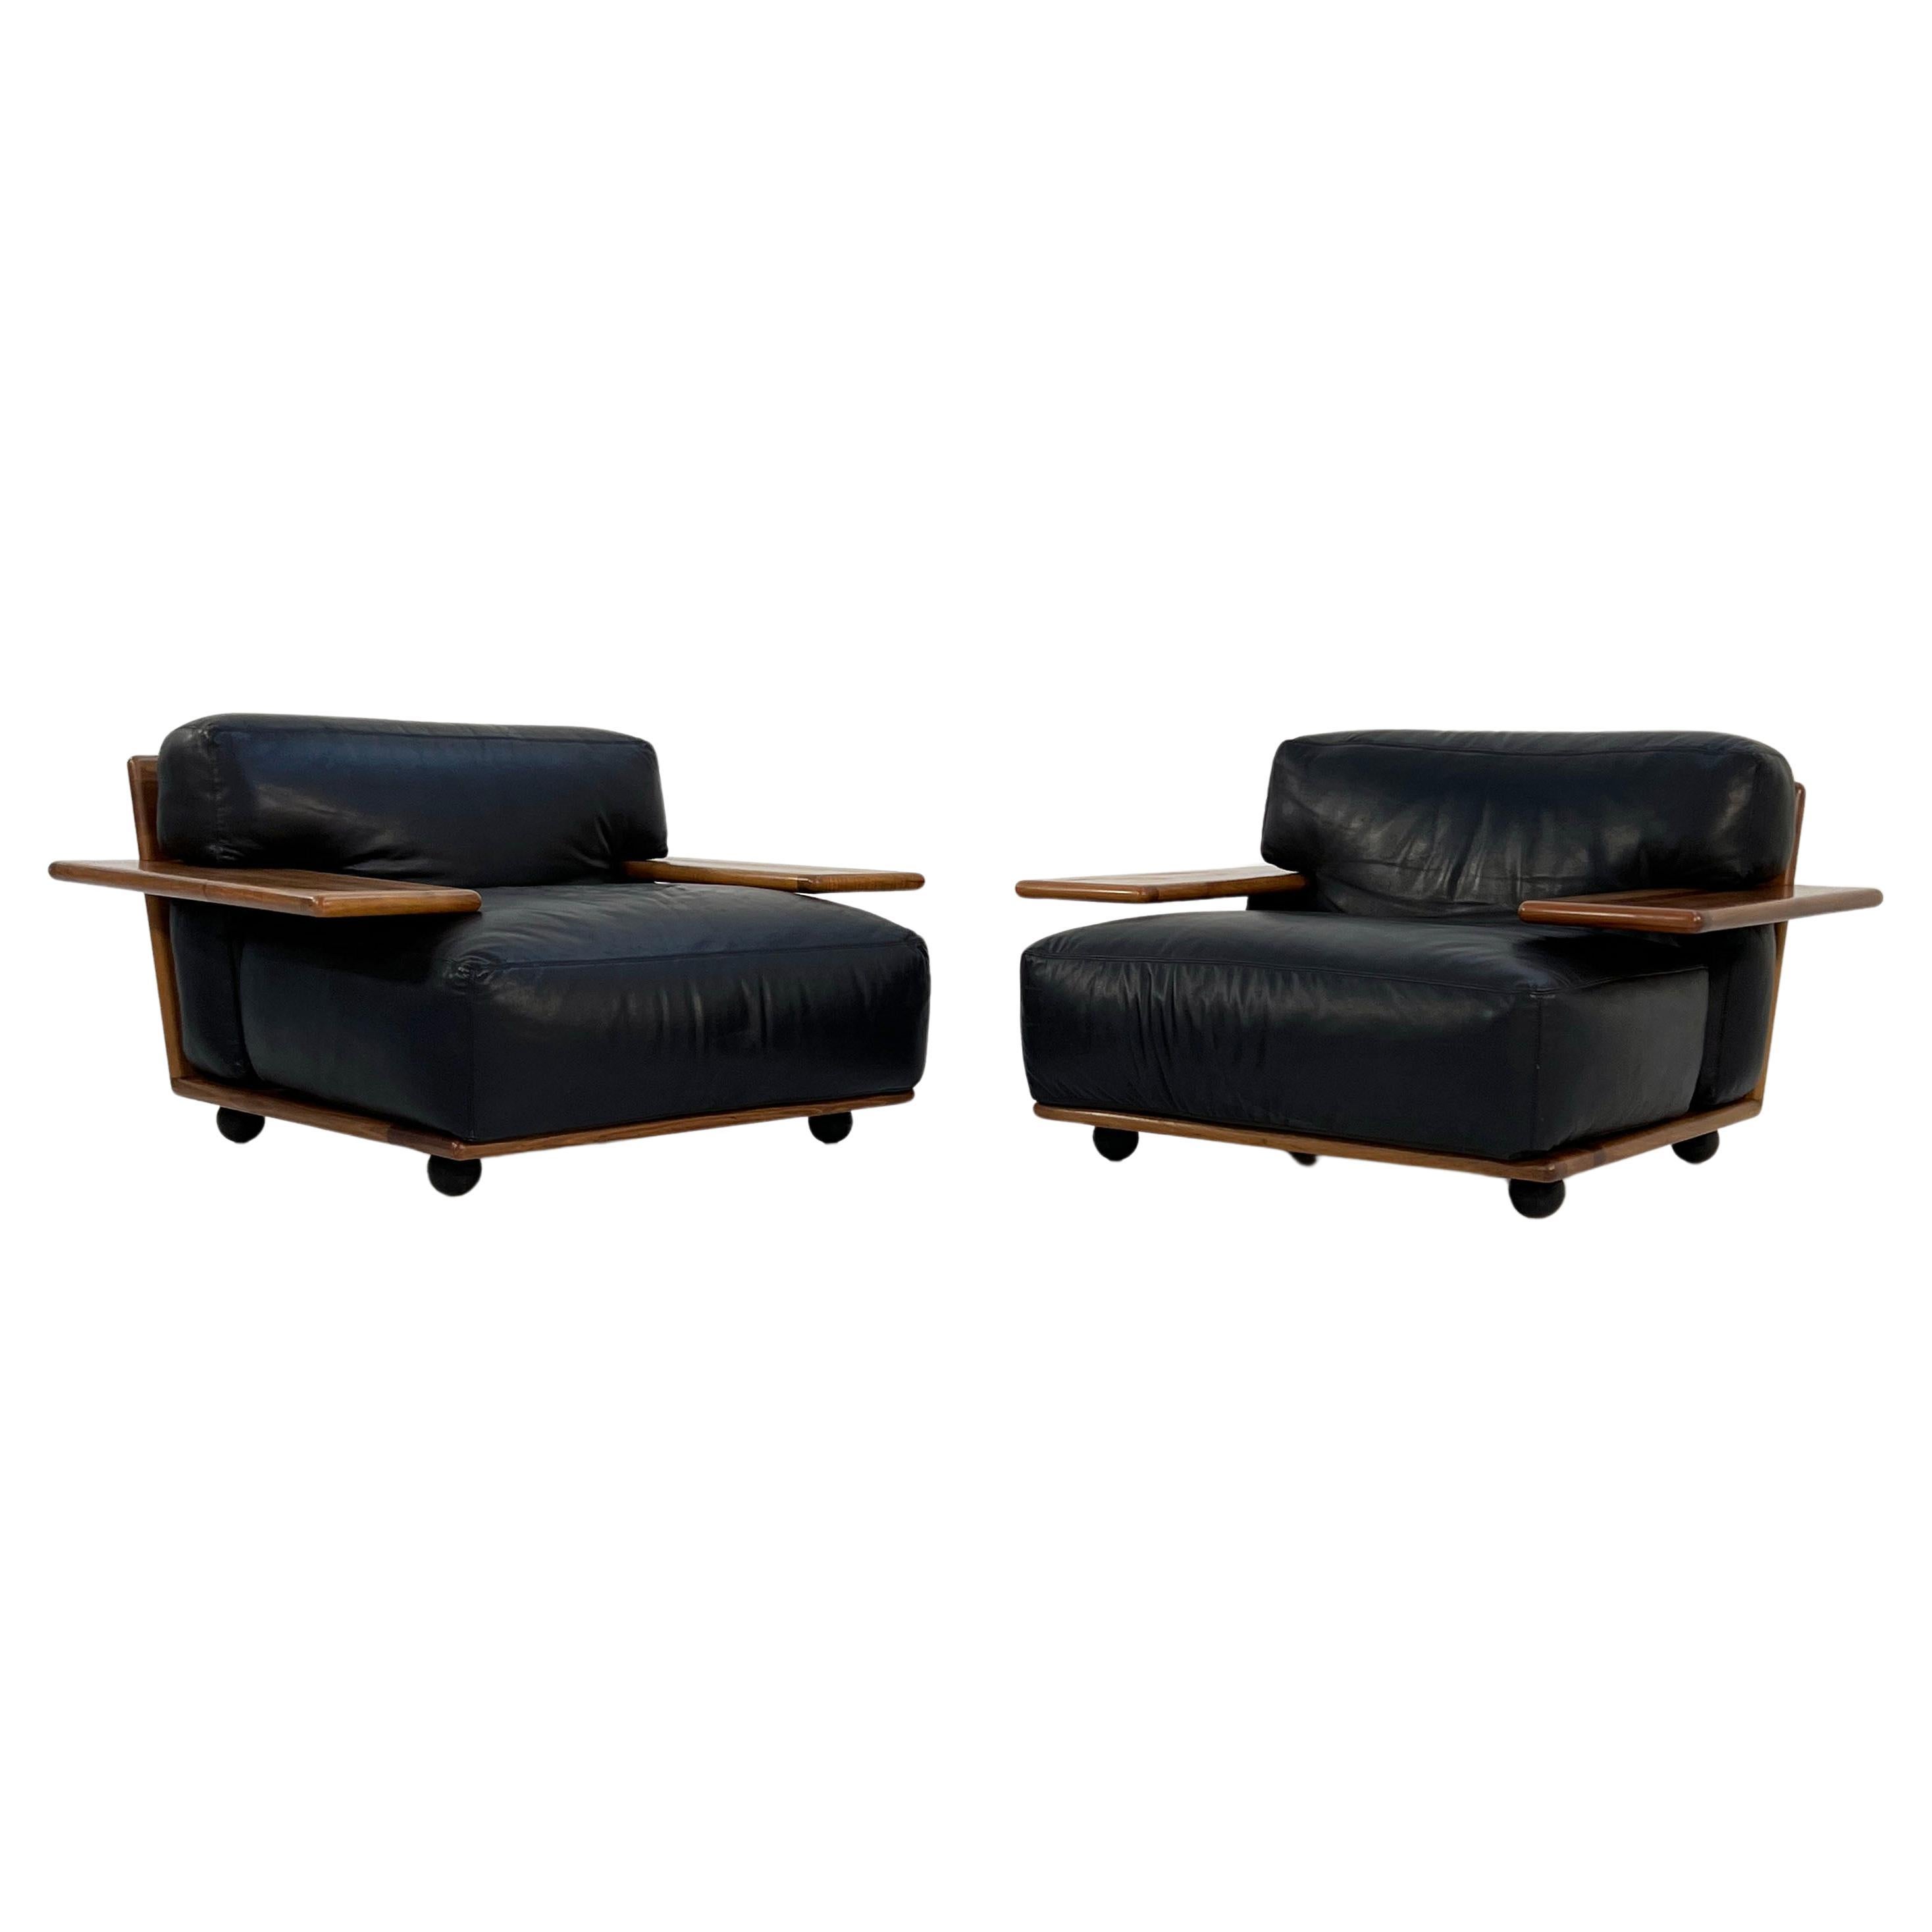 Pianura Armchair in Black Leather by Mario Bellini for Cassina, 1970s For Sale